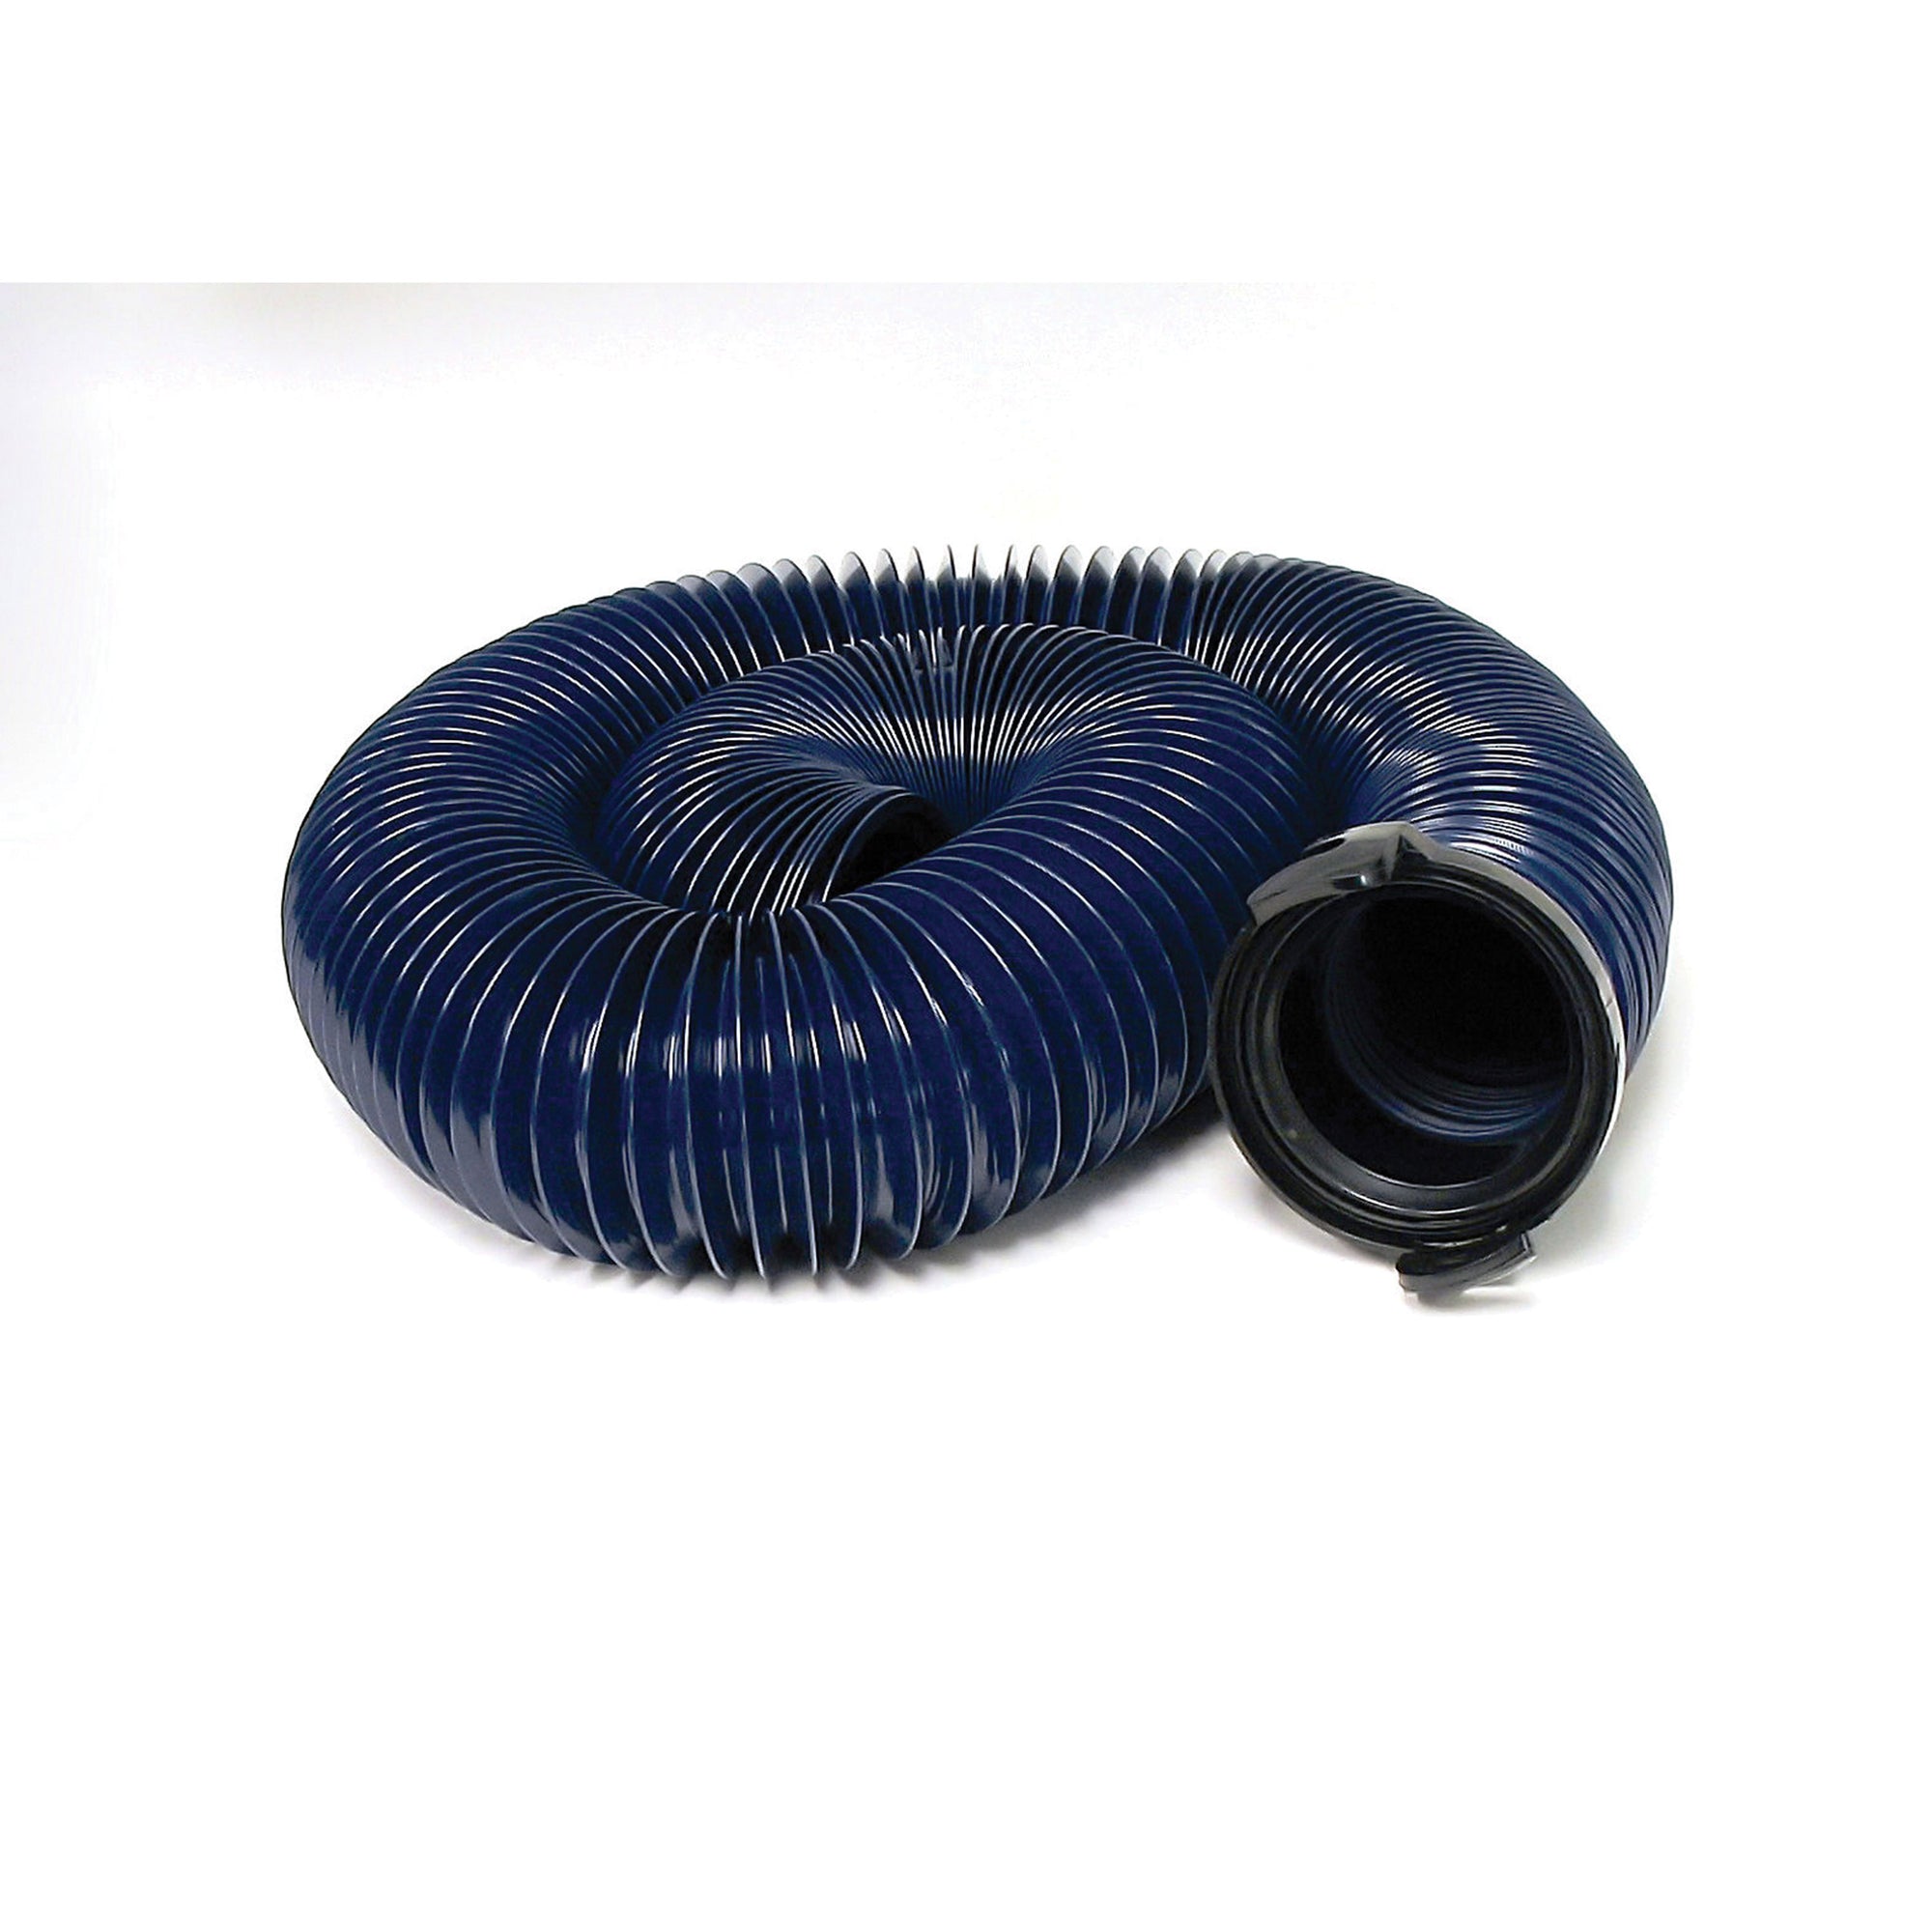 Valterra D04-0121 Quick Drain Standard RV Sewer Hose with T1024 Adapter - 20'